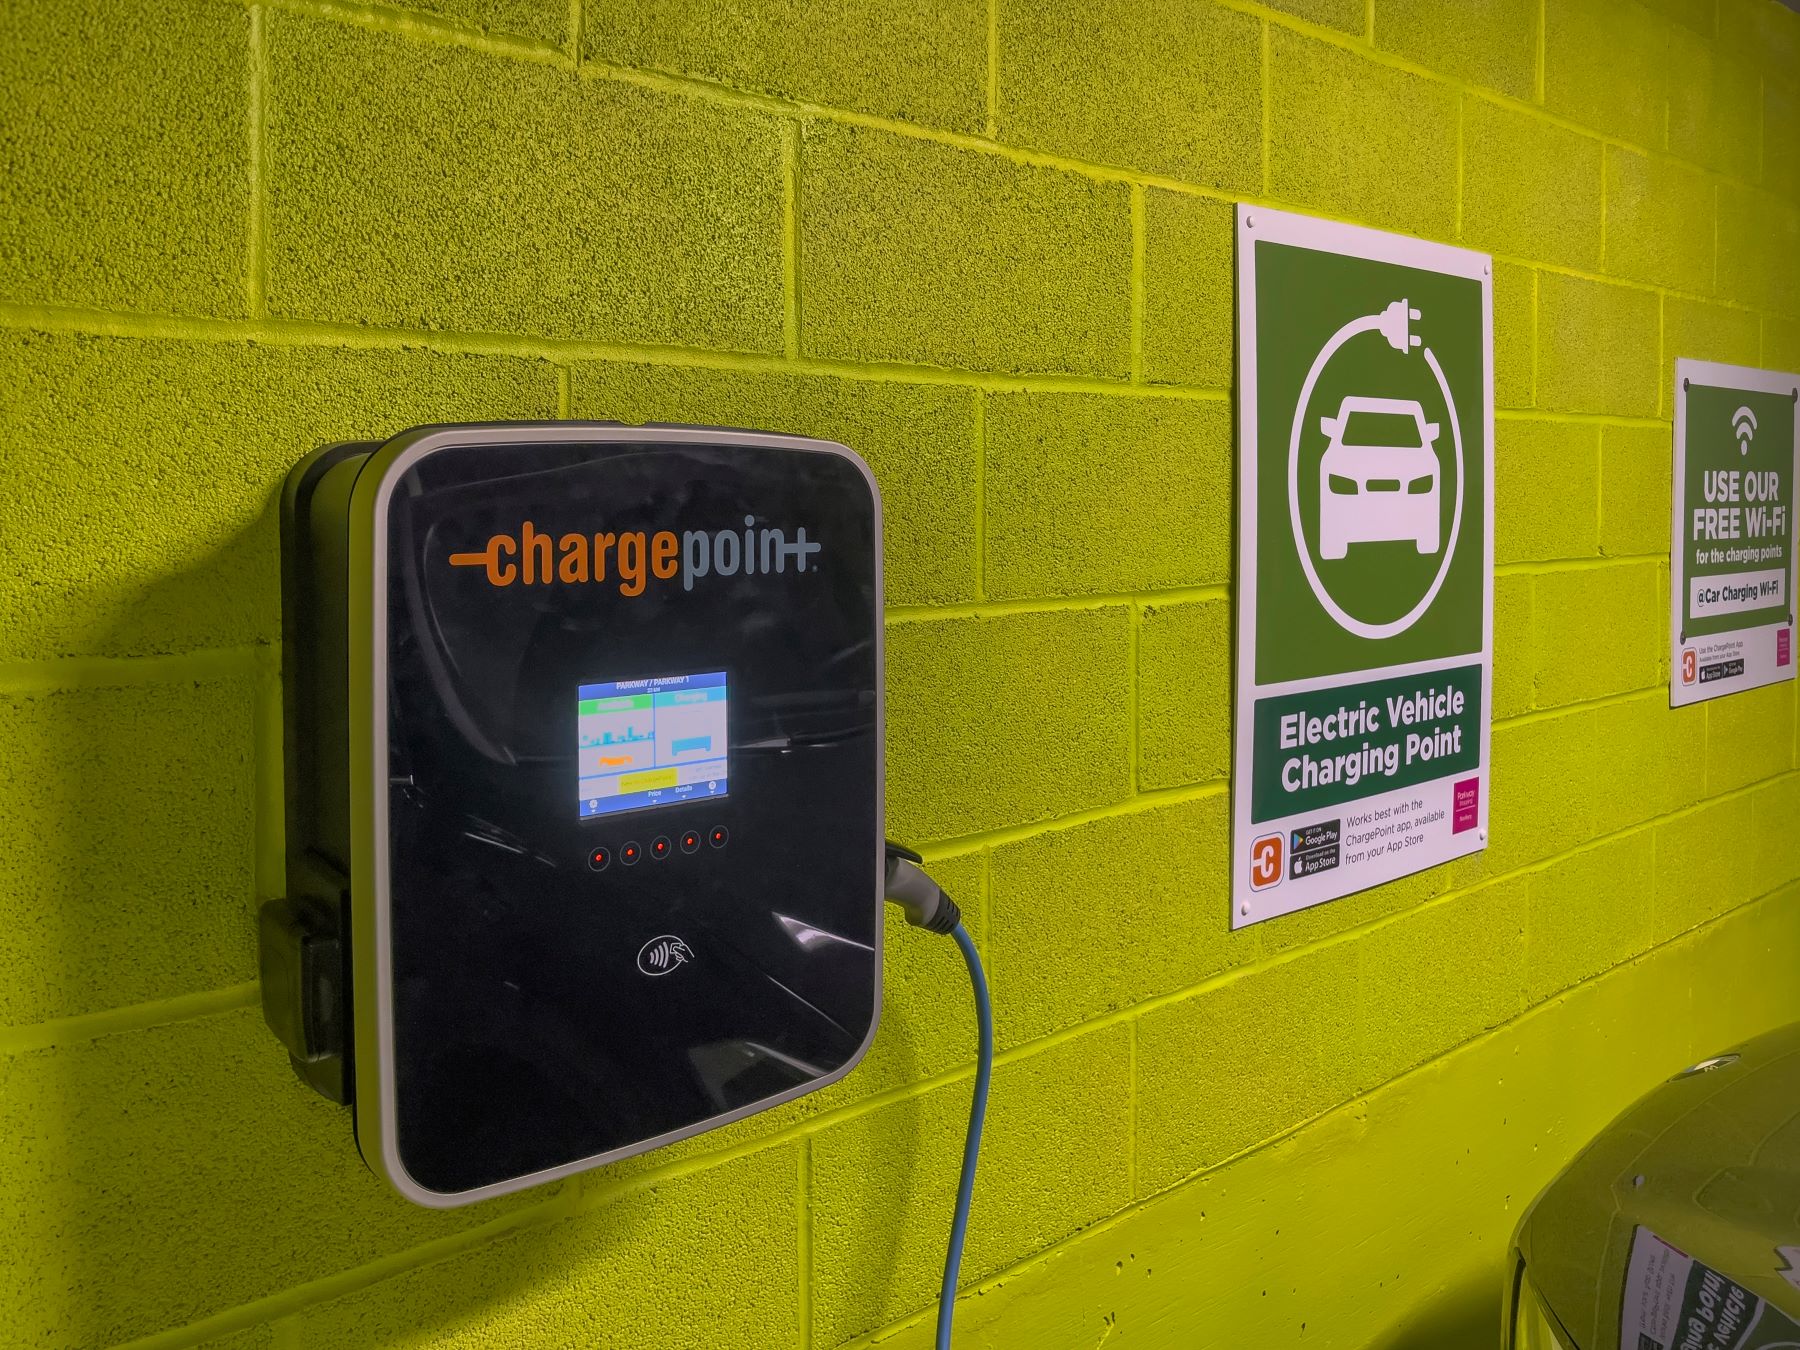 A ChargePoint electric charging station in an underground car park in Newbury, Berkshire, England, U.K.